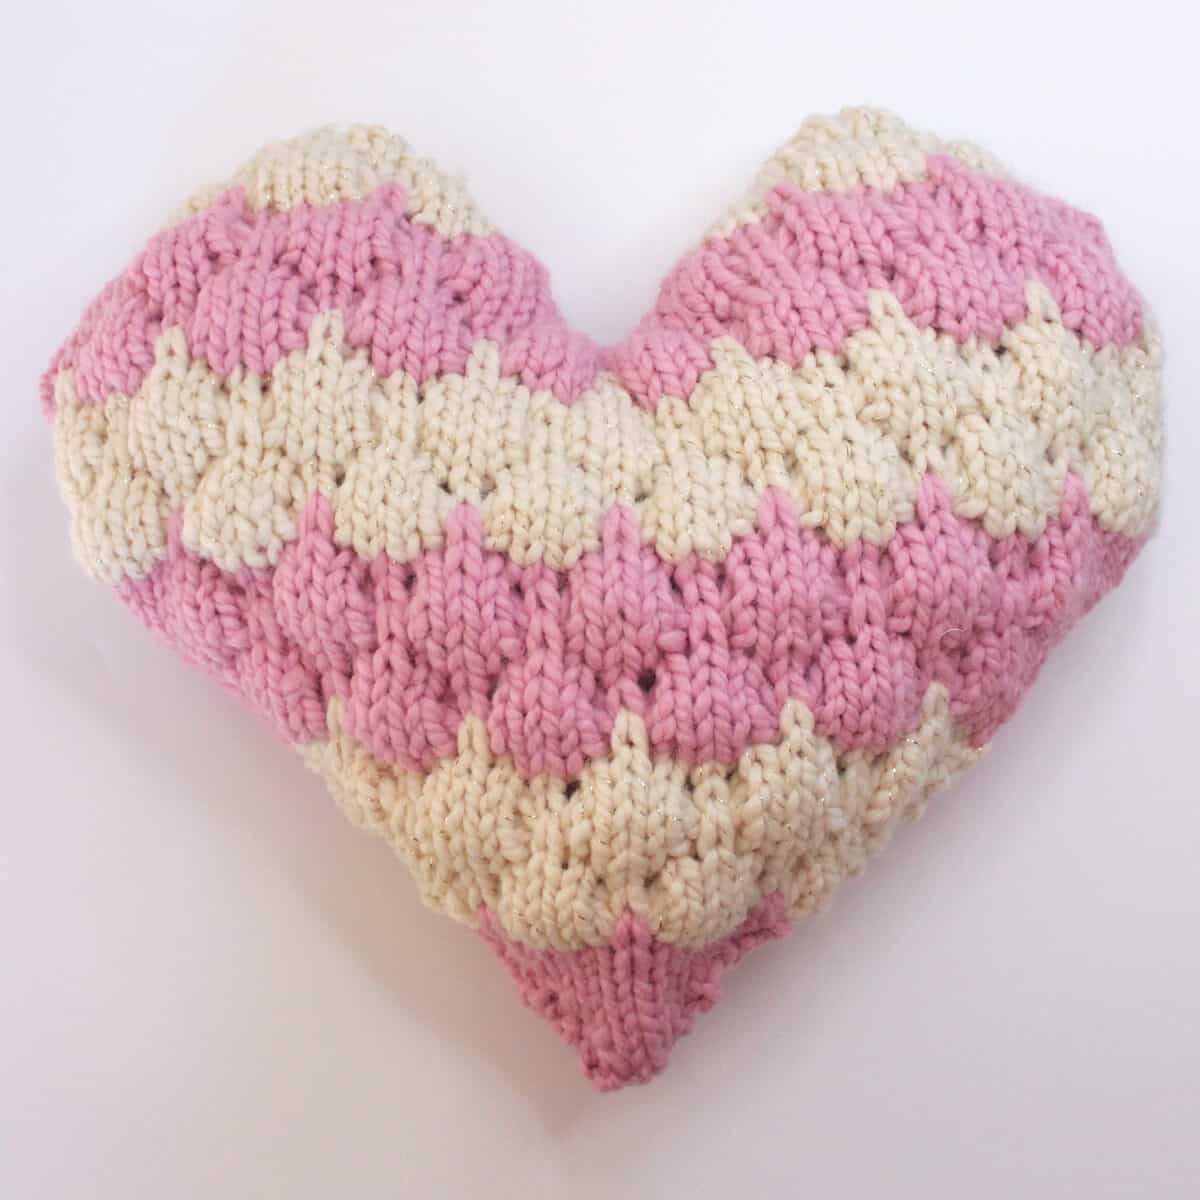 Heart Shaped Bubble Stitch knitted pillow in cream and pink yarn colors.